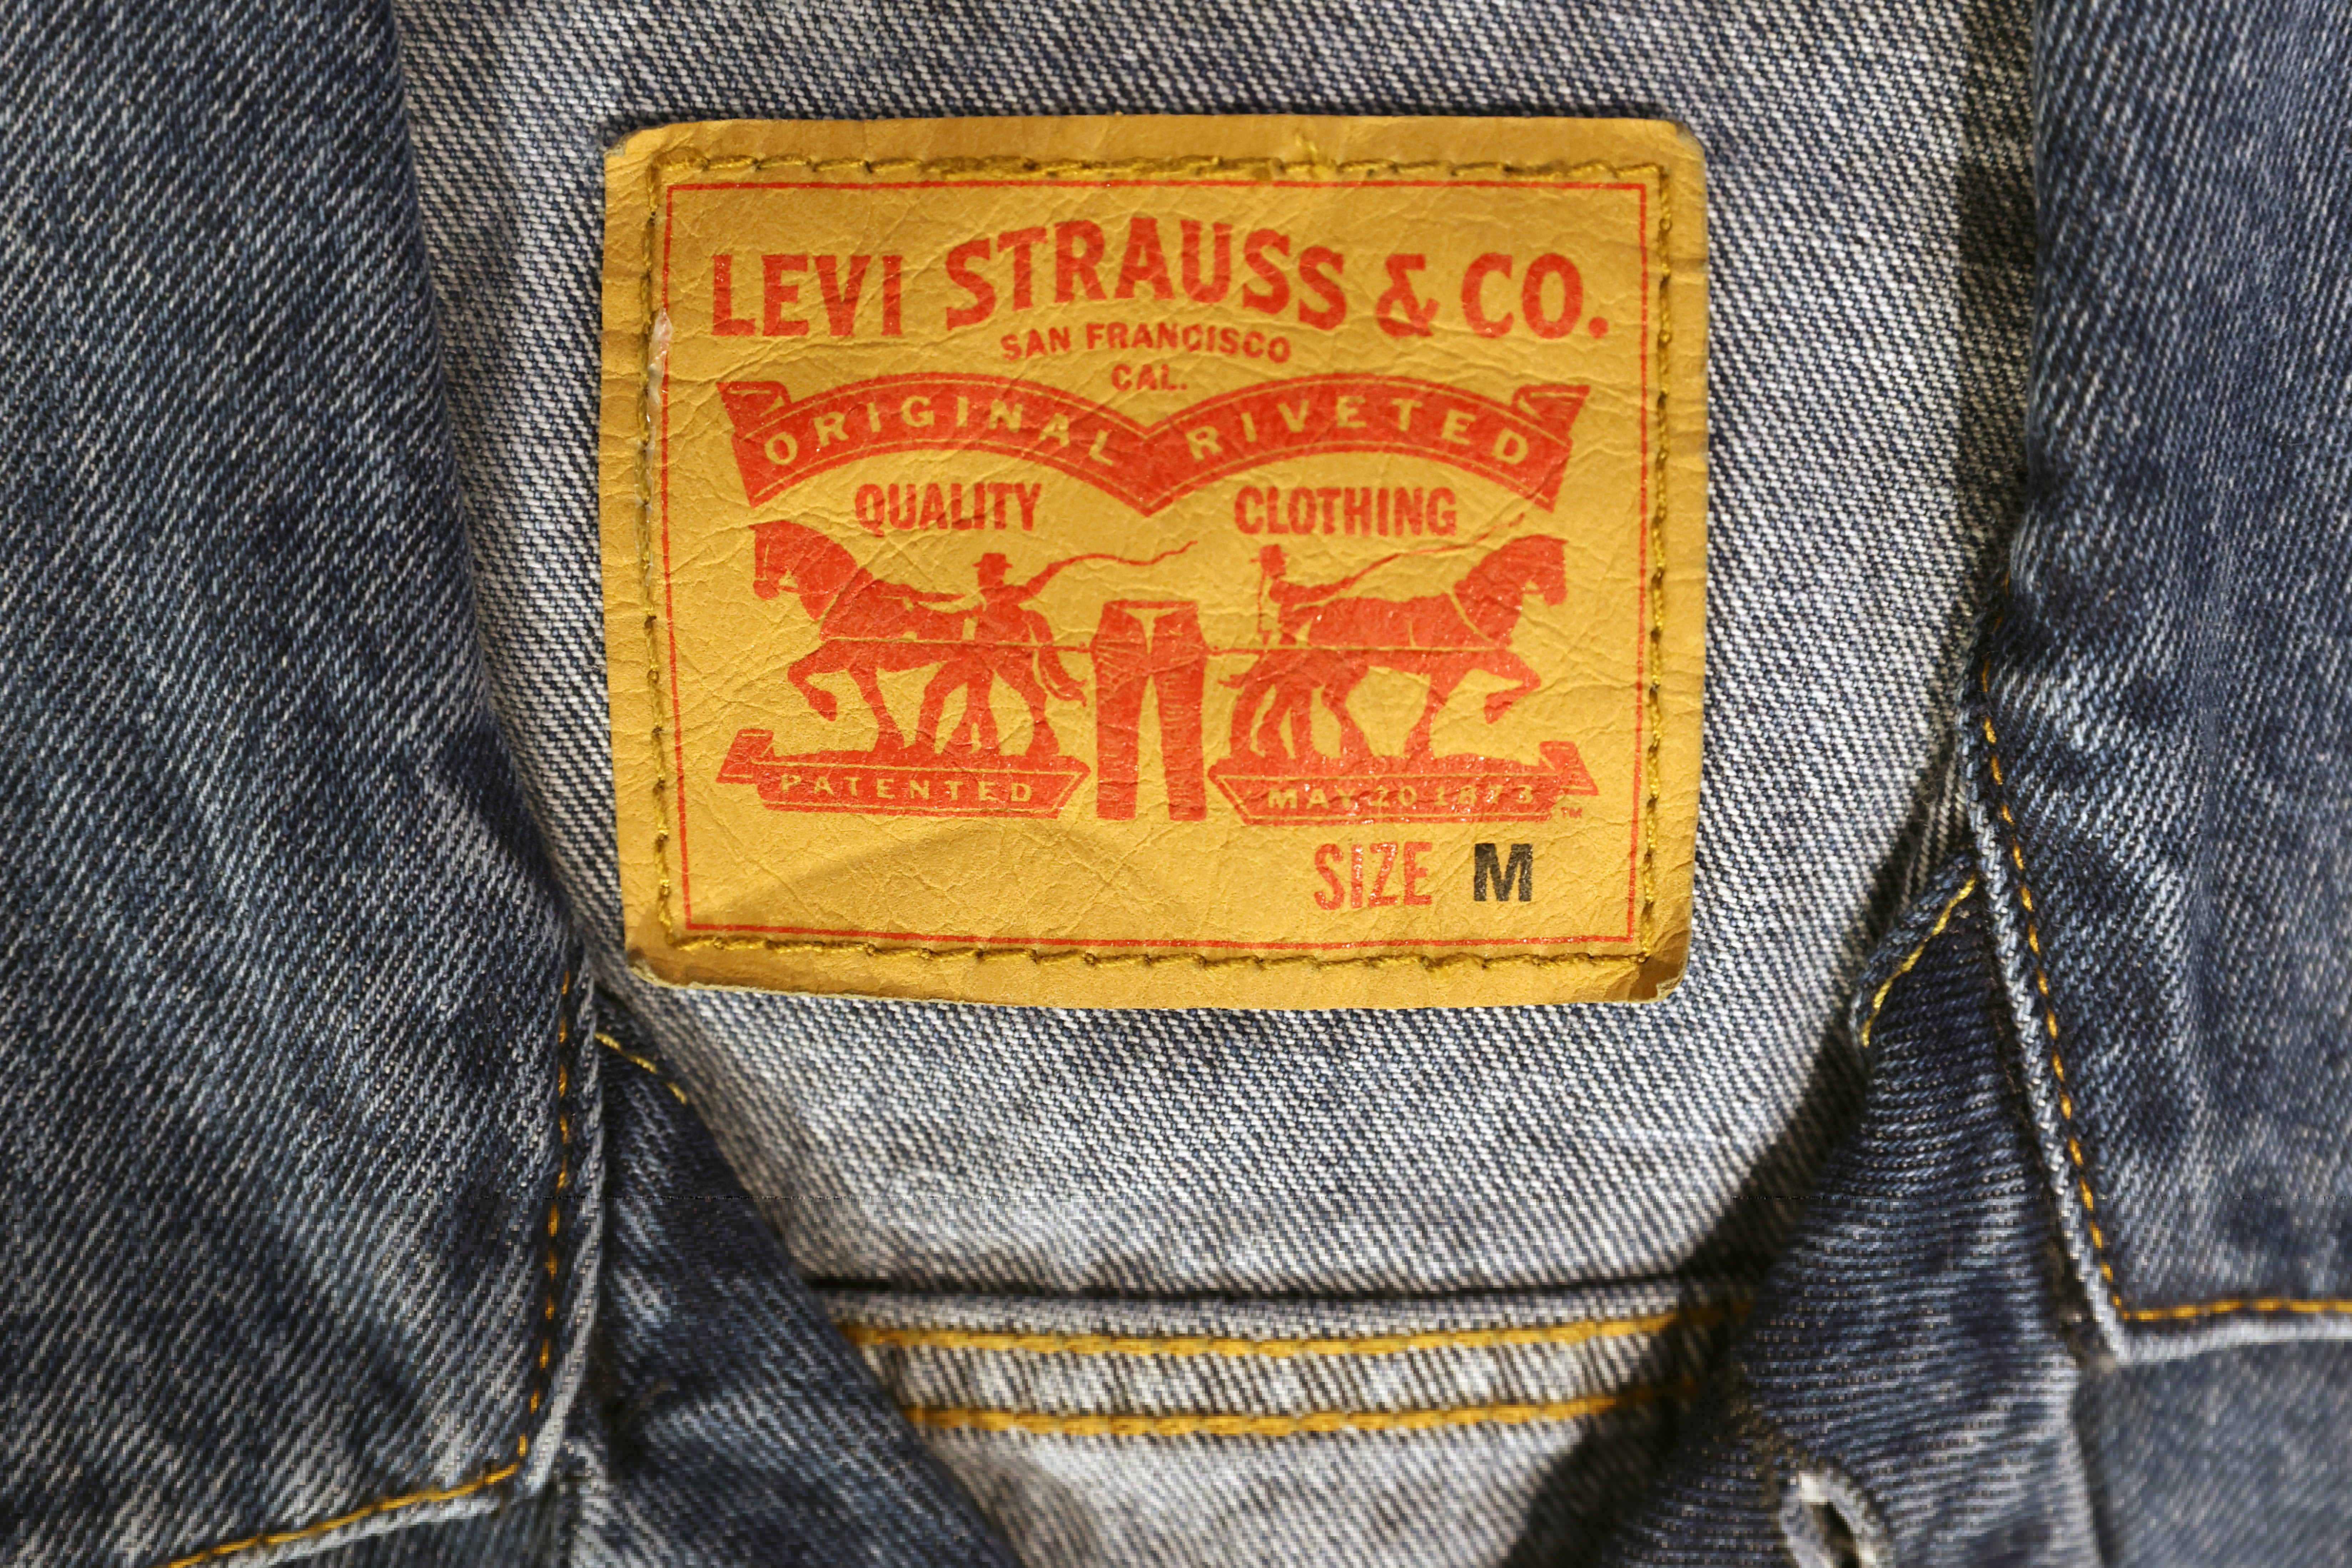 Levi Strauss to cut prices as weak consumer spending hits outlook